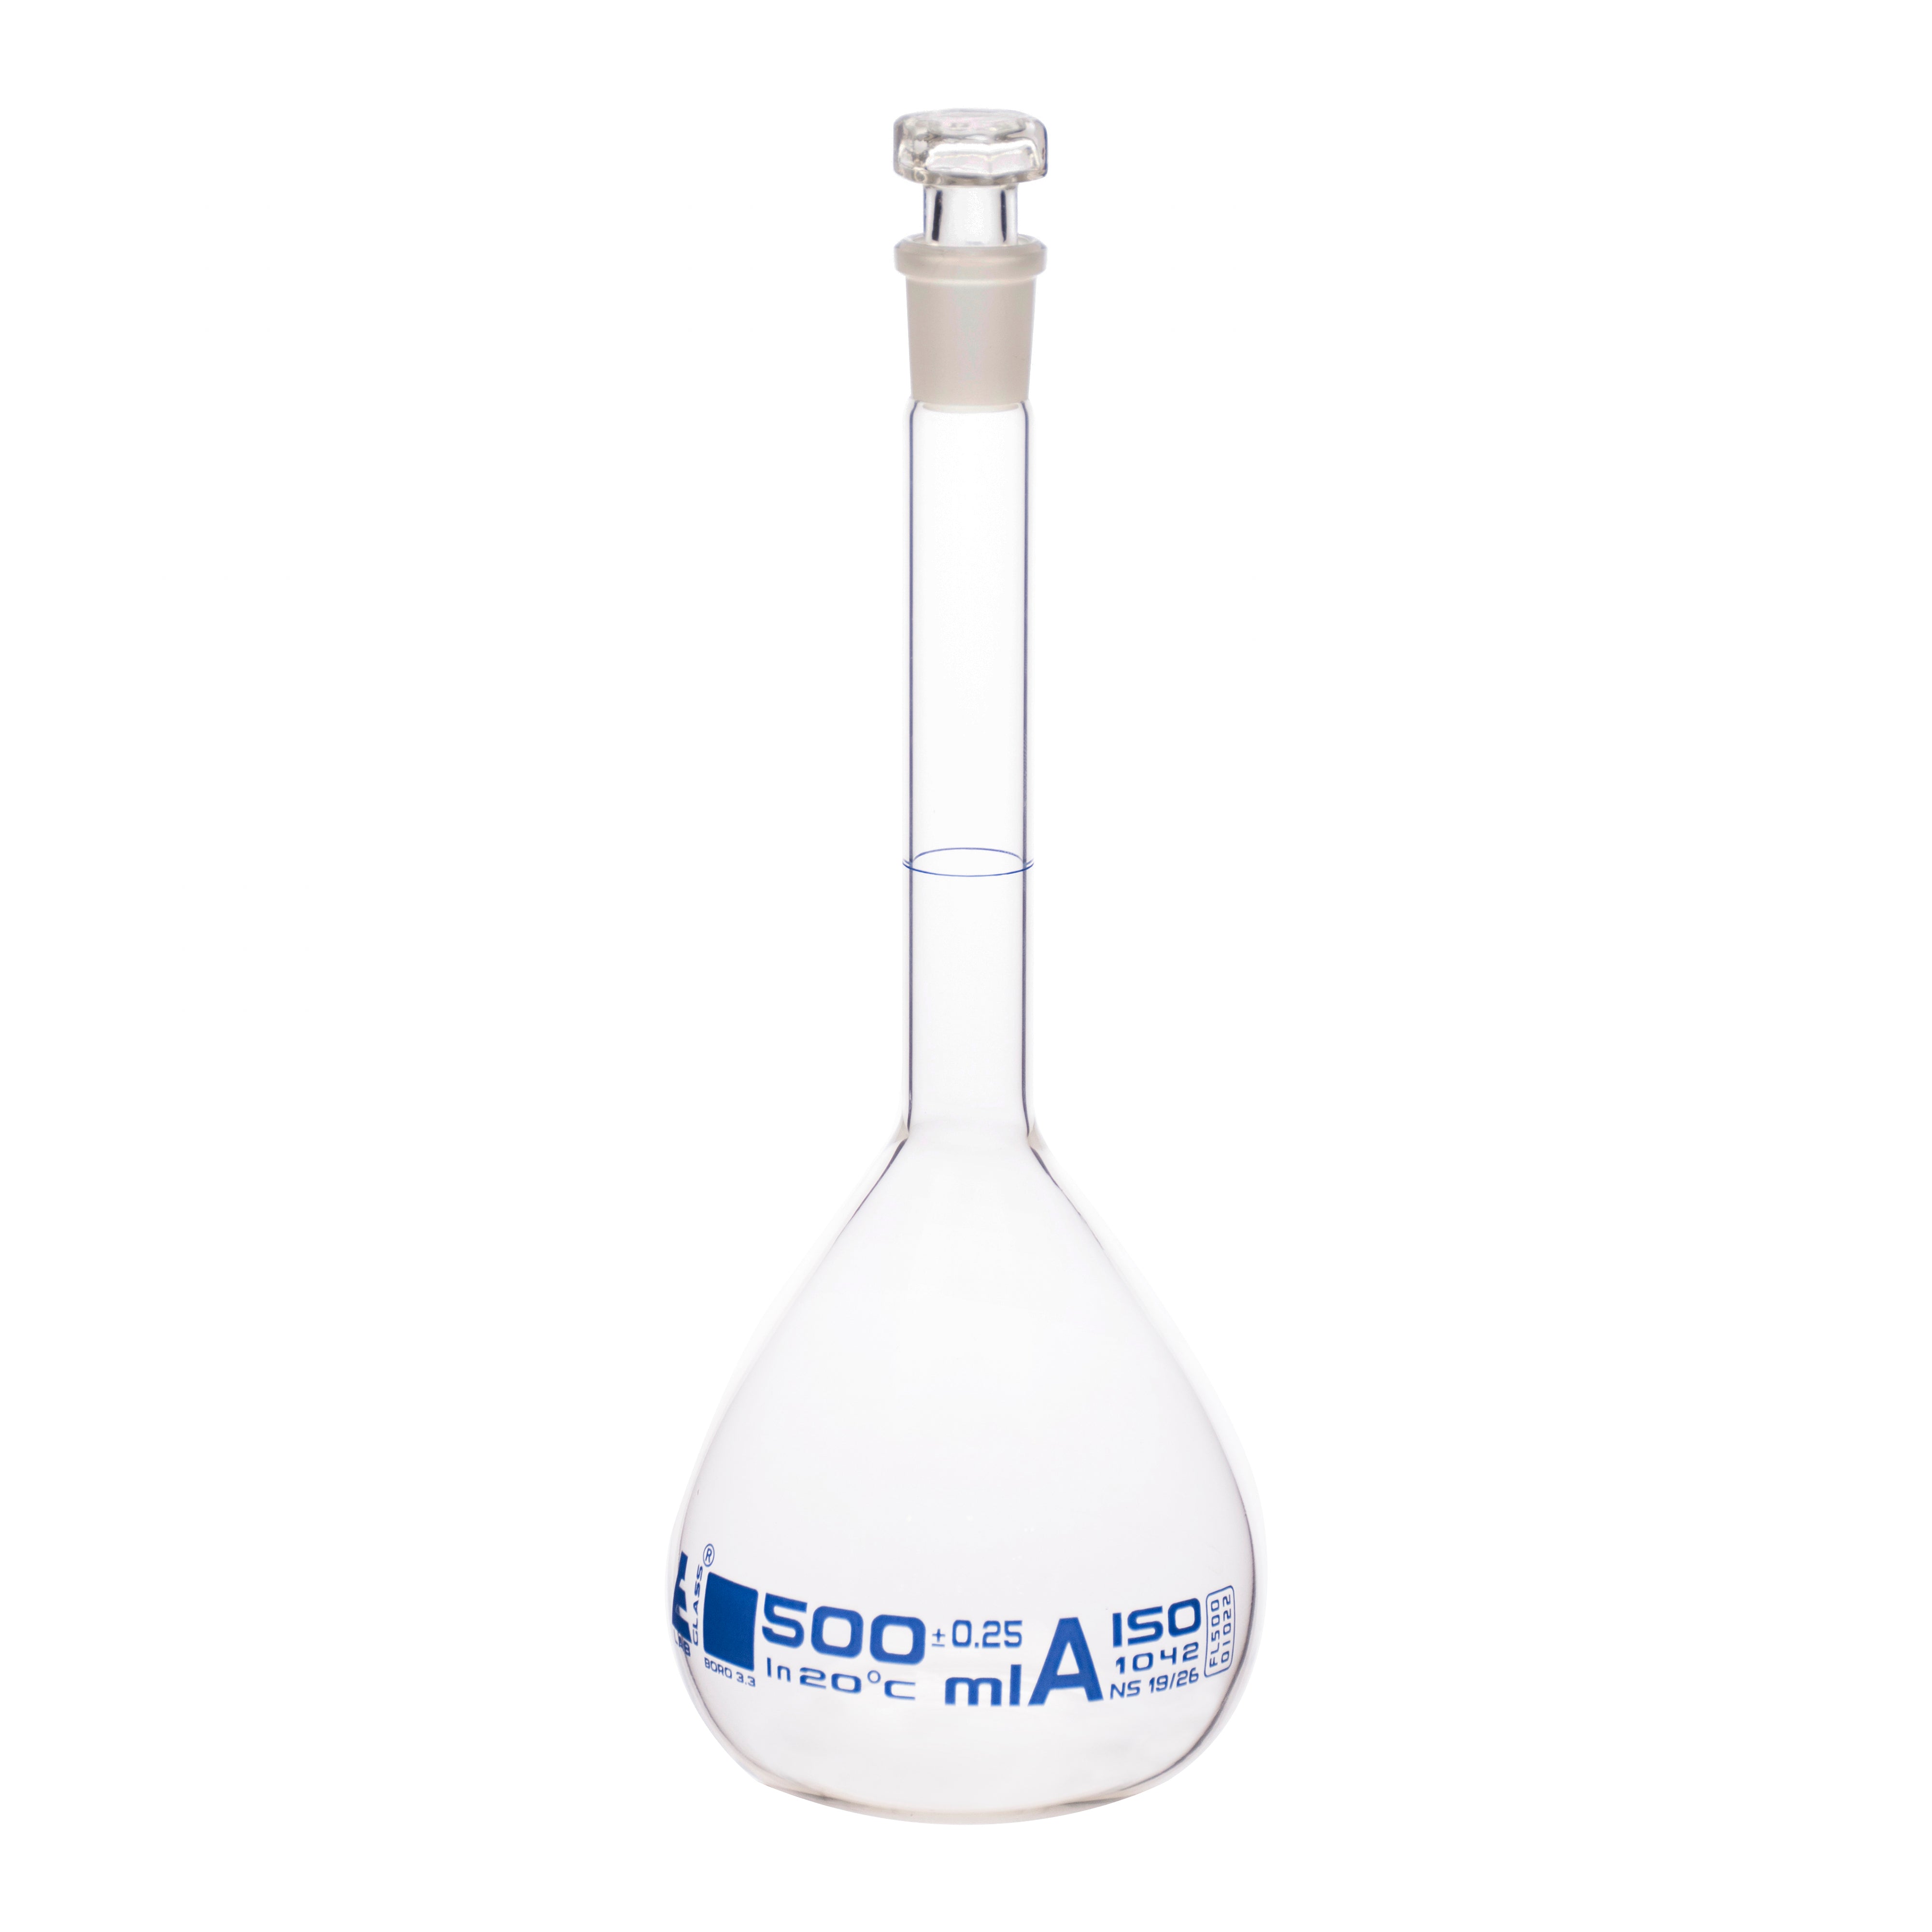 Borosilicate Volumetric Flask with Hollow Glass Stopper, 500ml, Class A, Blue Print, Autoclavable